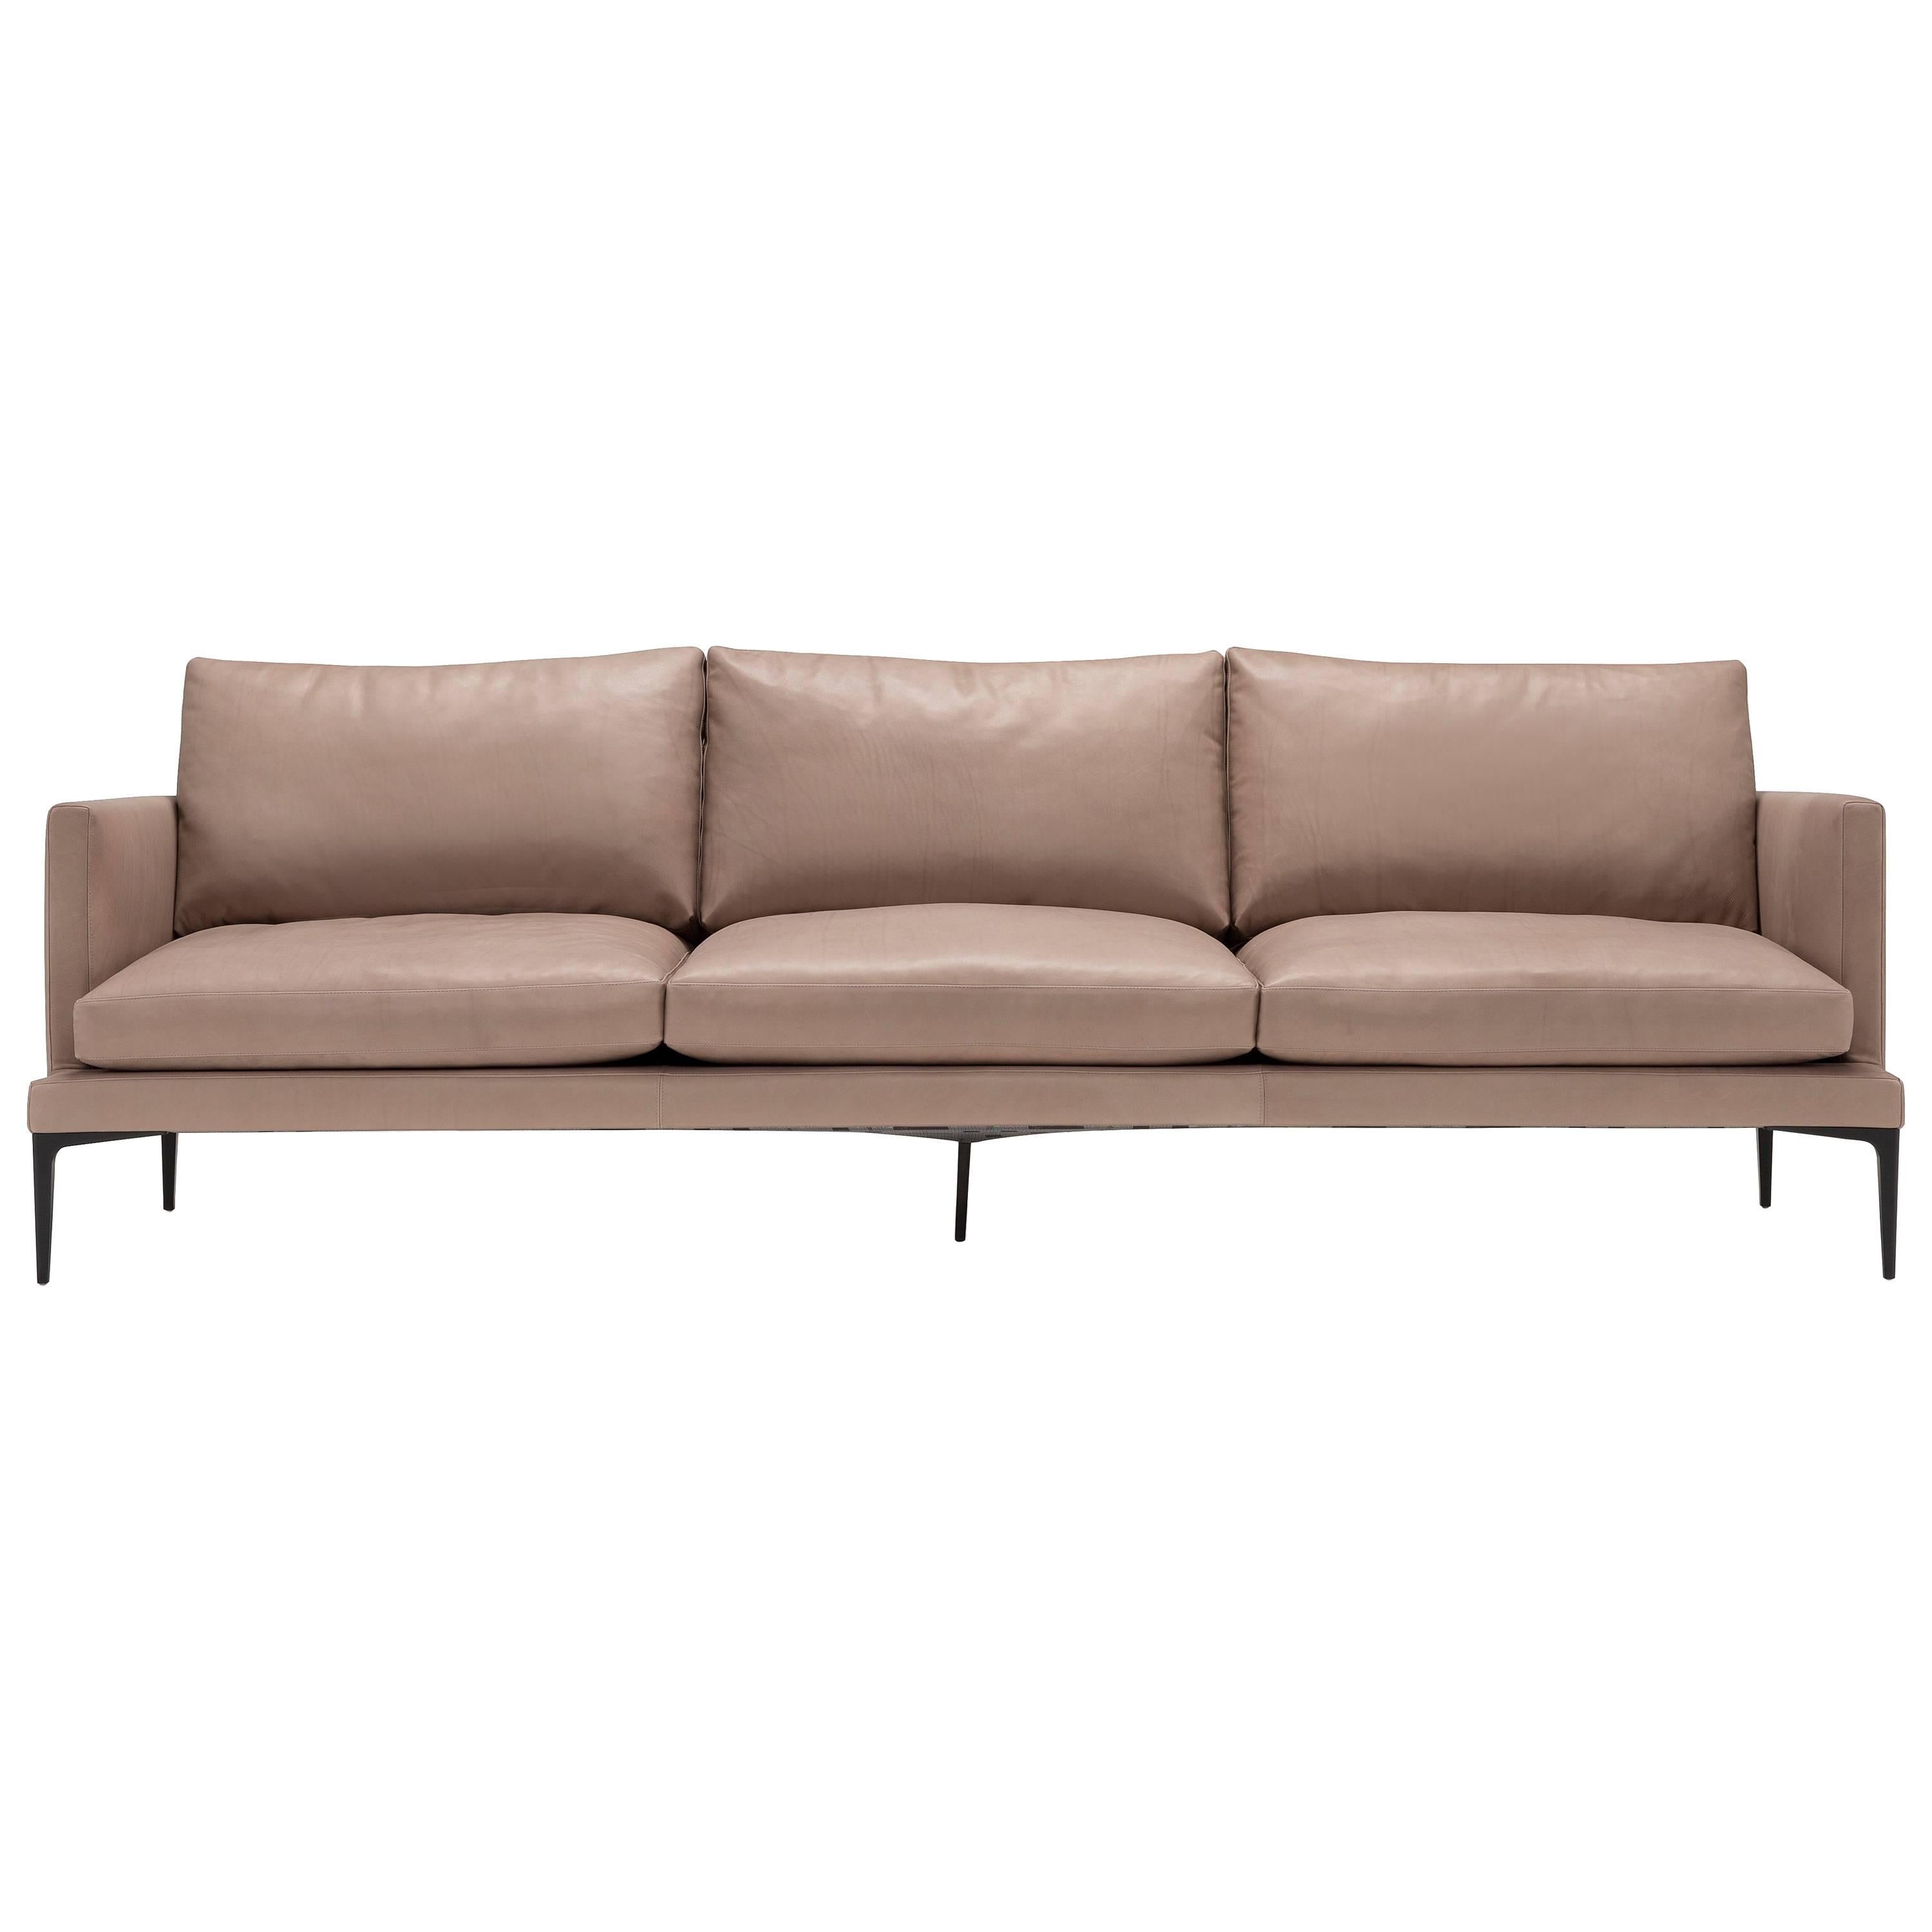 Segno Sofa in Taupe Leather by Amura Lab For Sale